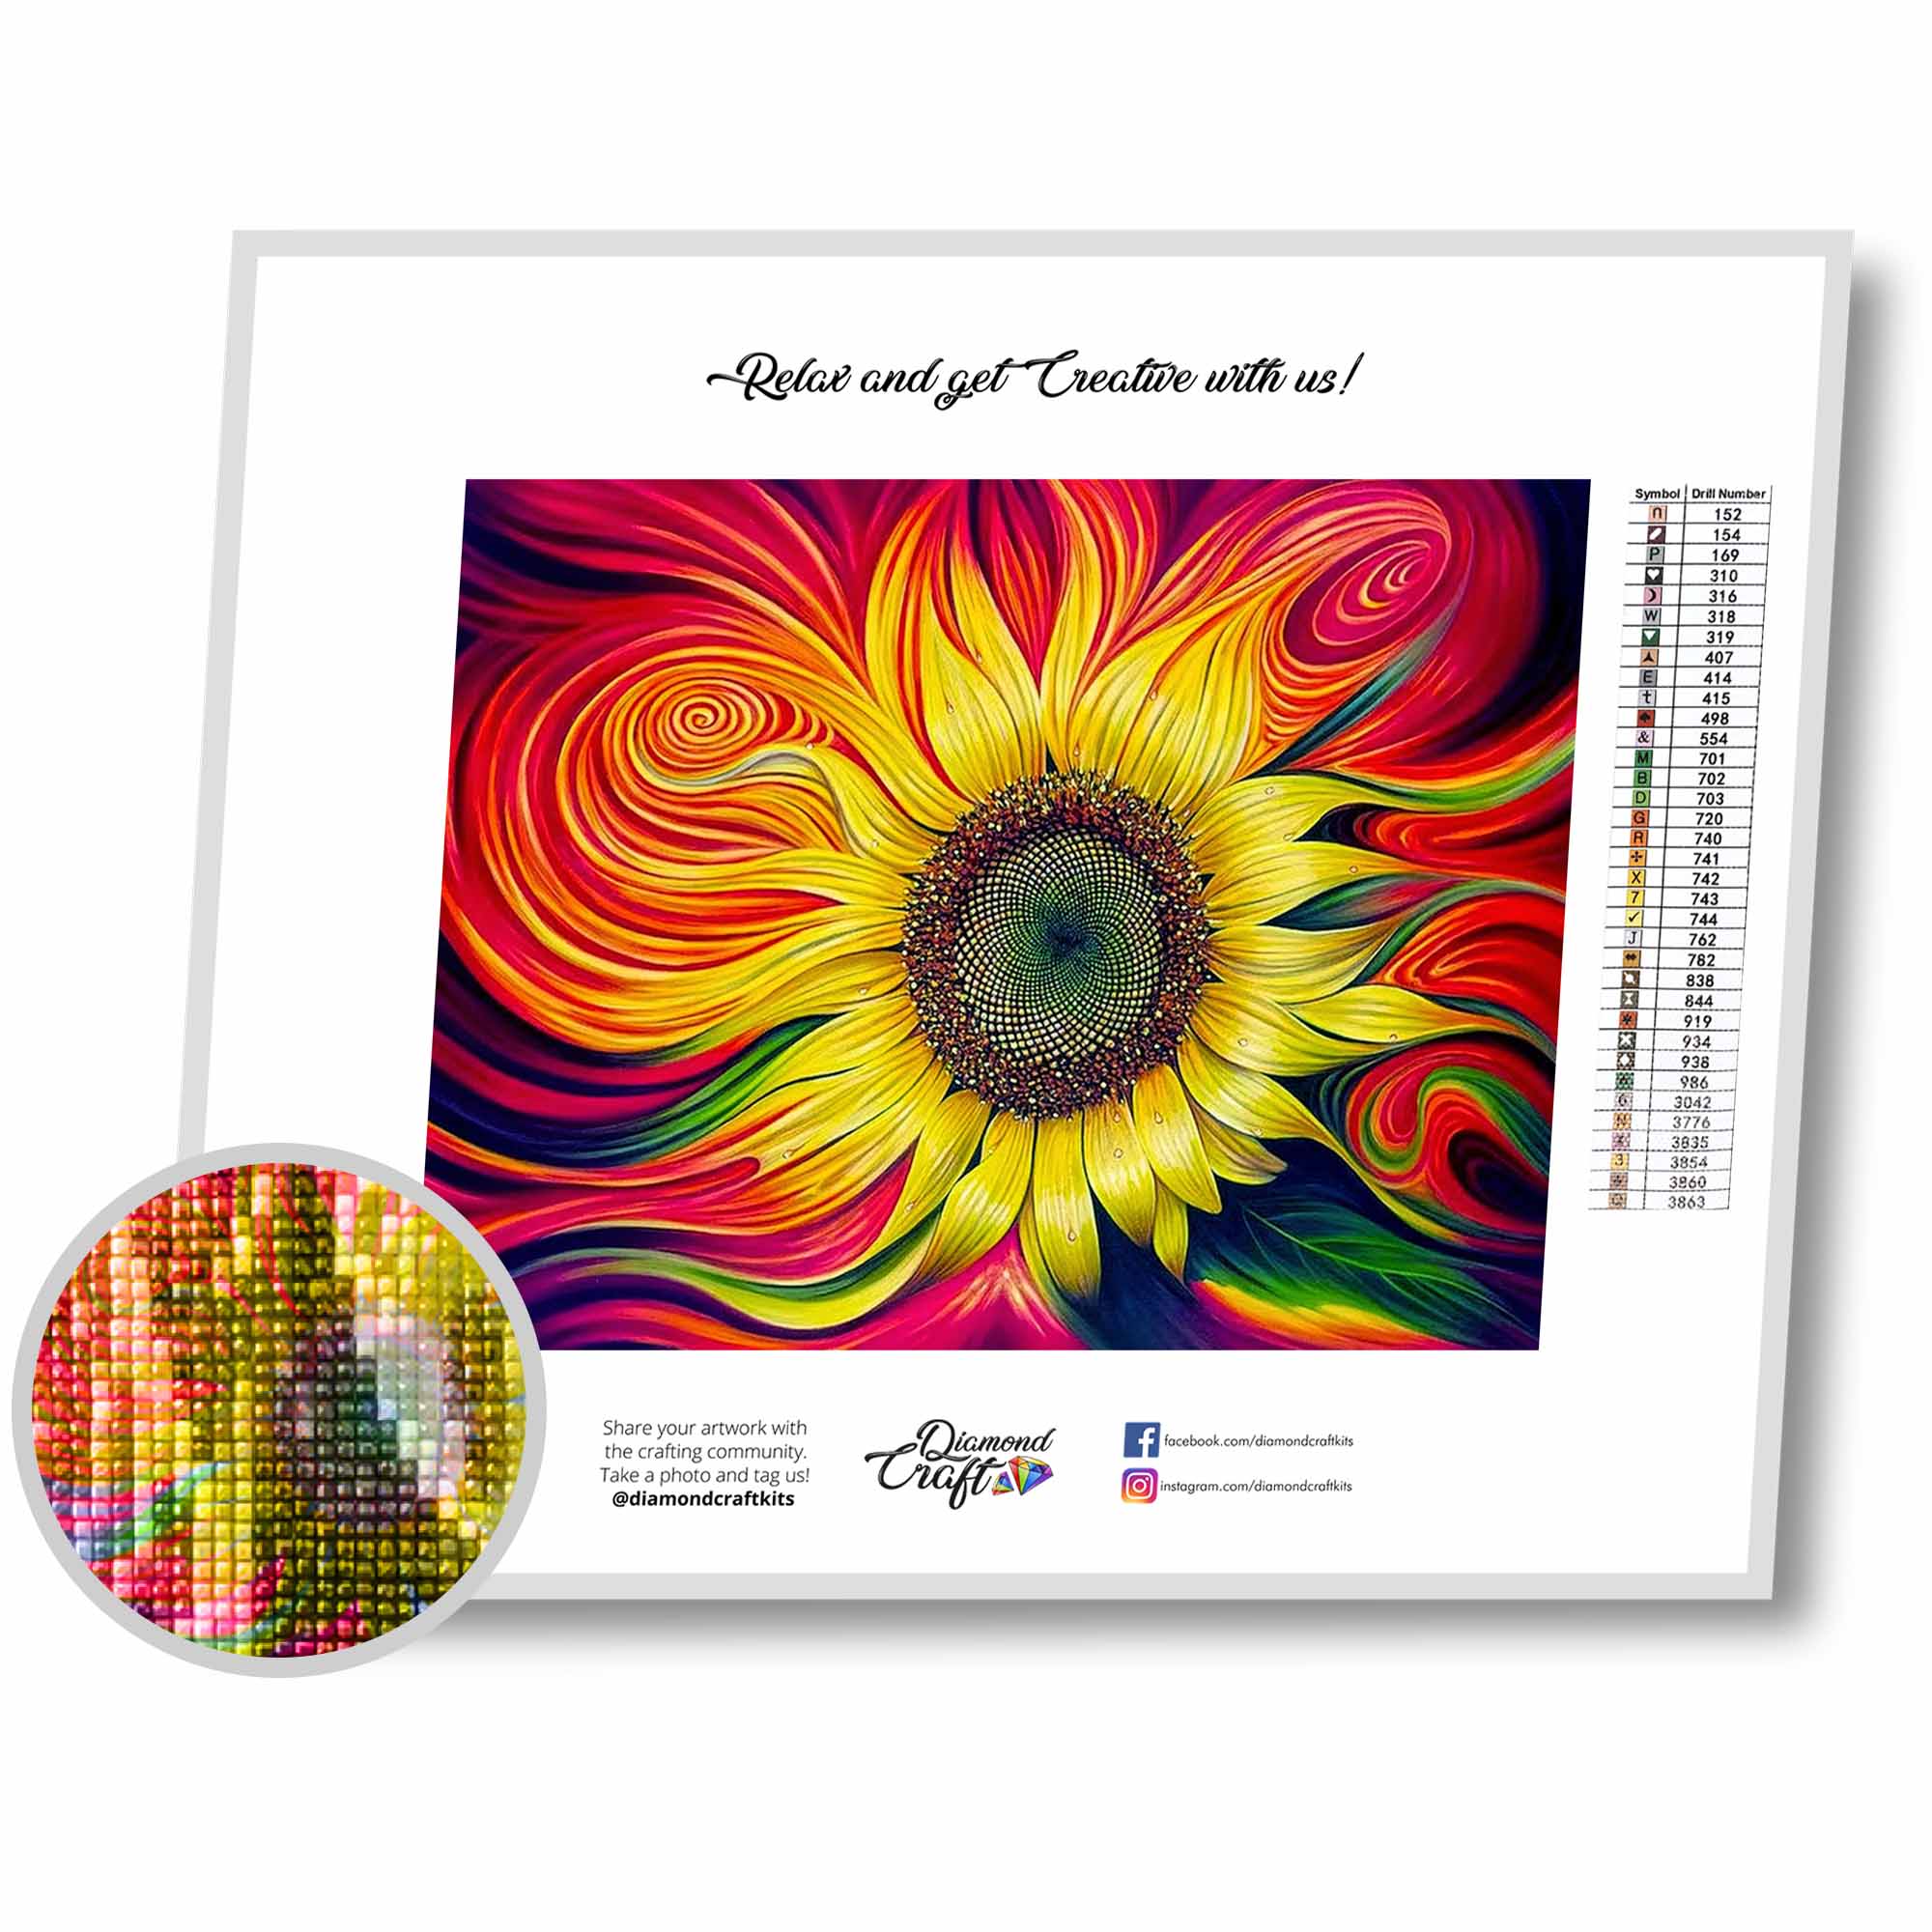 Diamond Painting Kits for Adults, DIY 5D Thanksgiving Diamond Painting Kits  Full Drill Fall Diamond Art Sunflower and Bird Diamond Painting Craft for